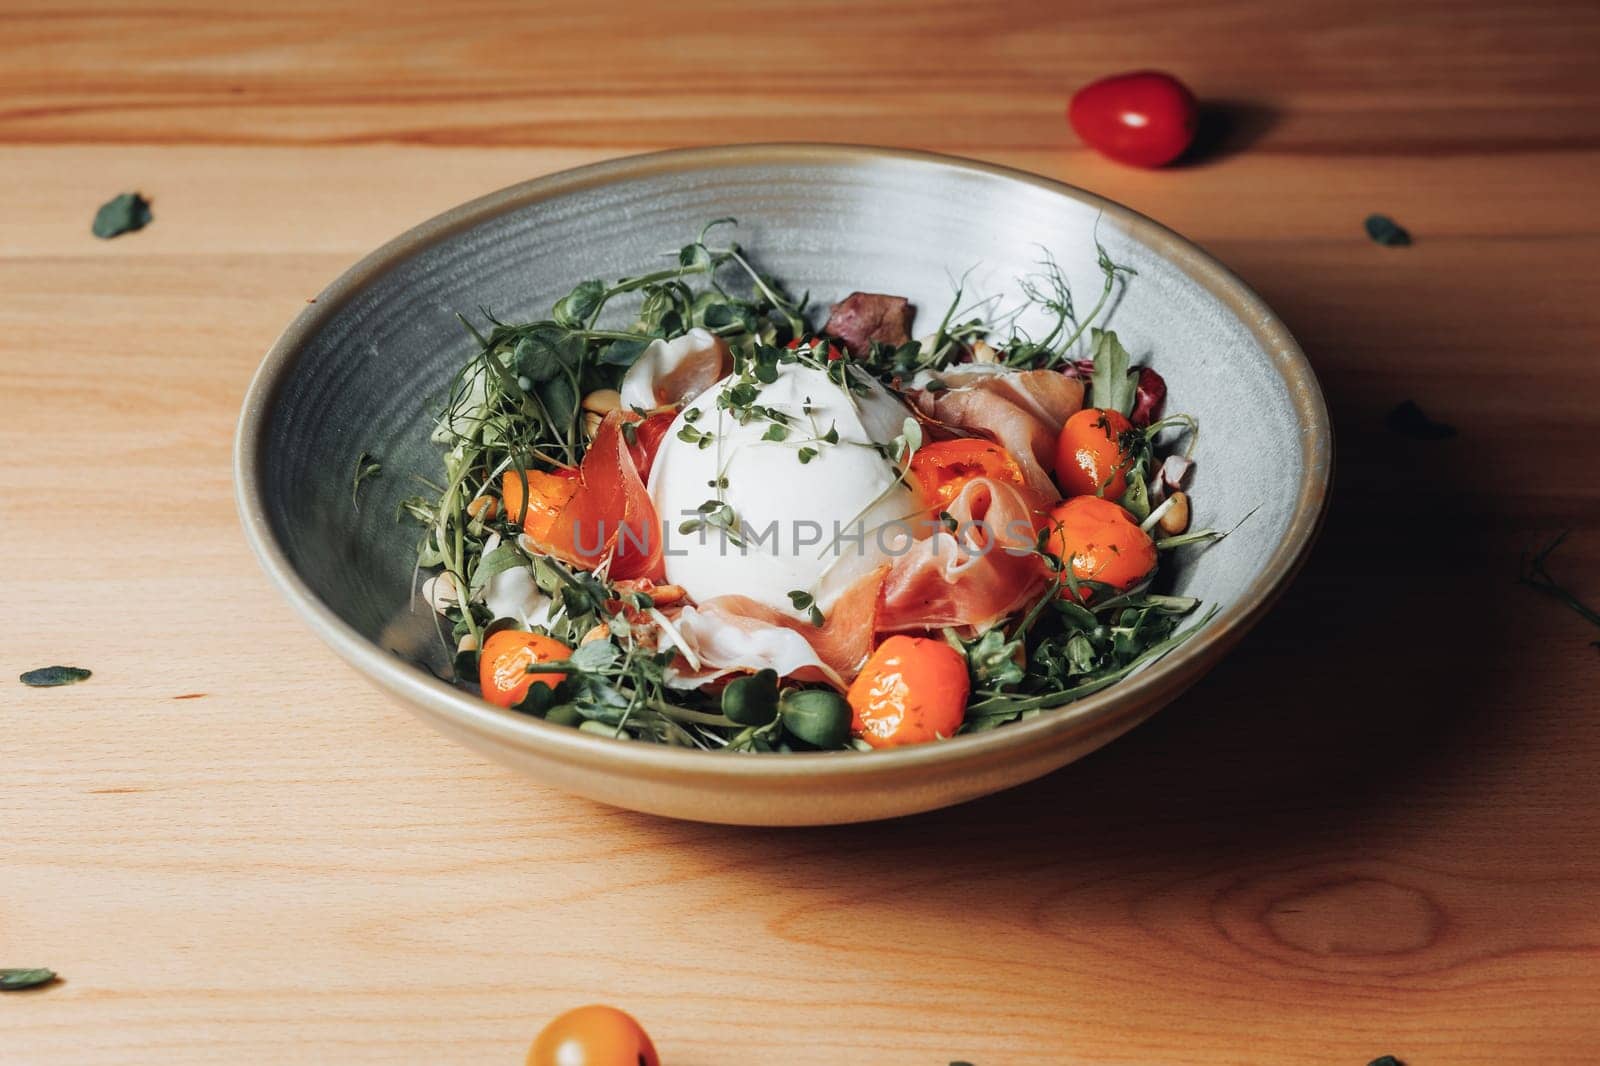 Tempting Ham and Tomato Salad Delight by Miron